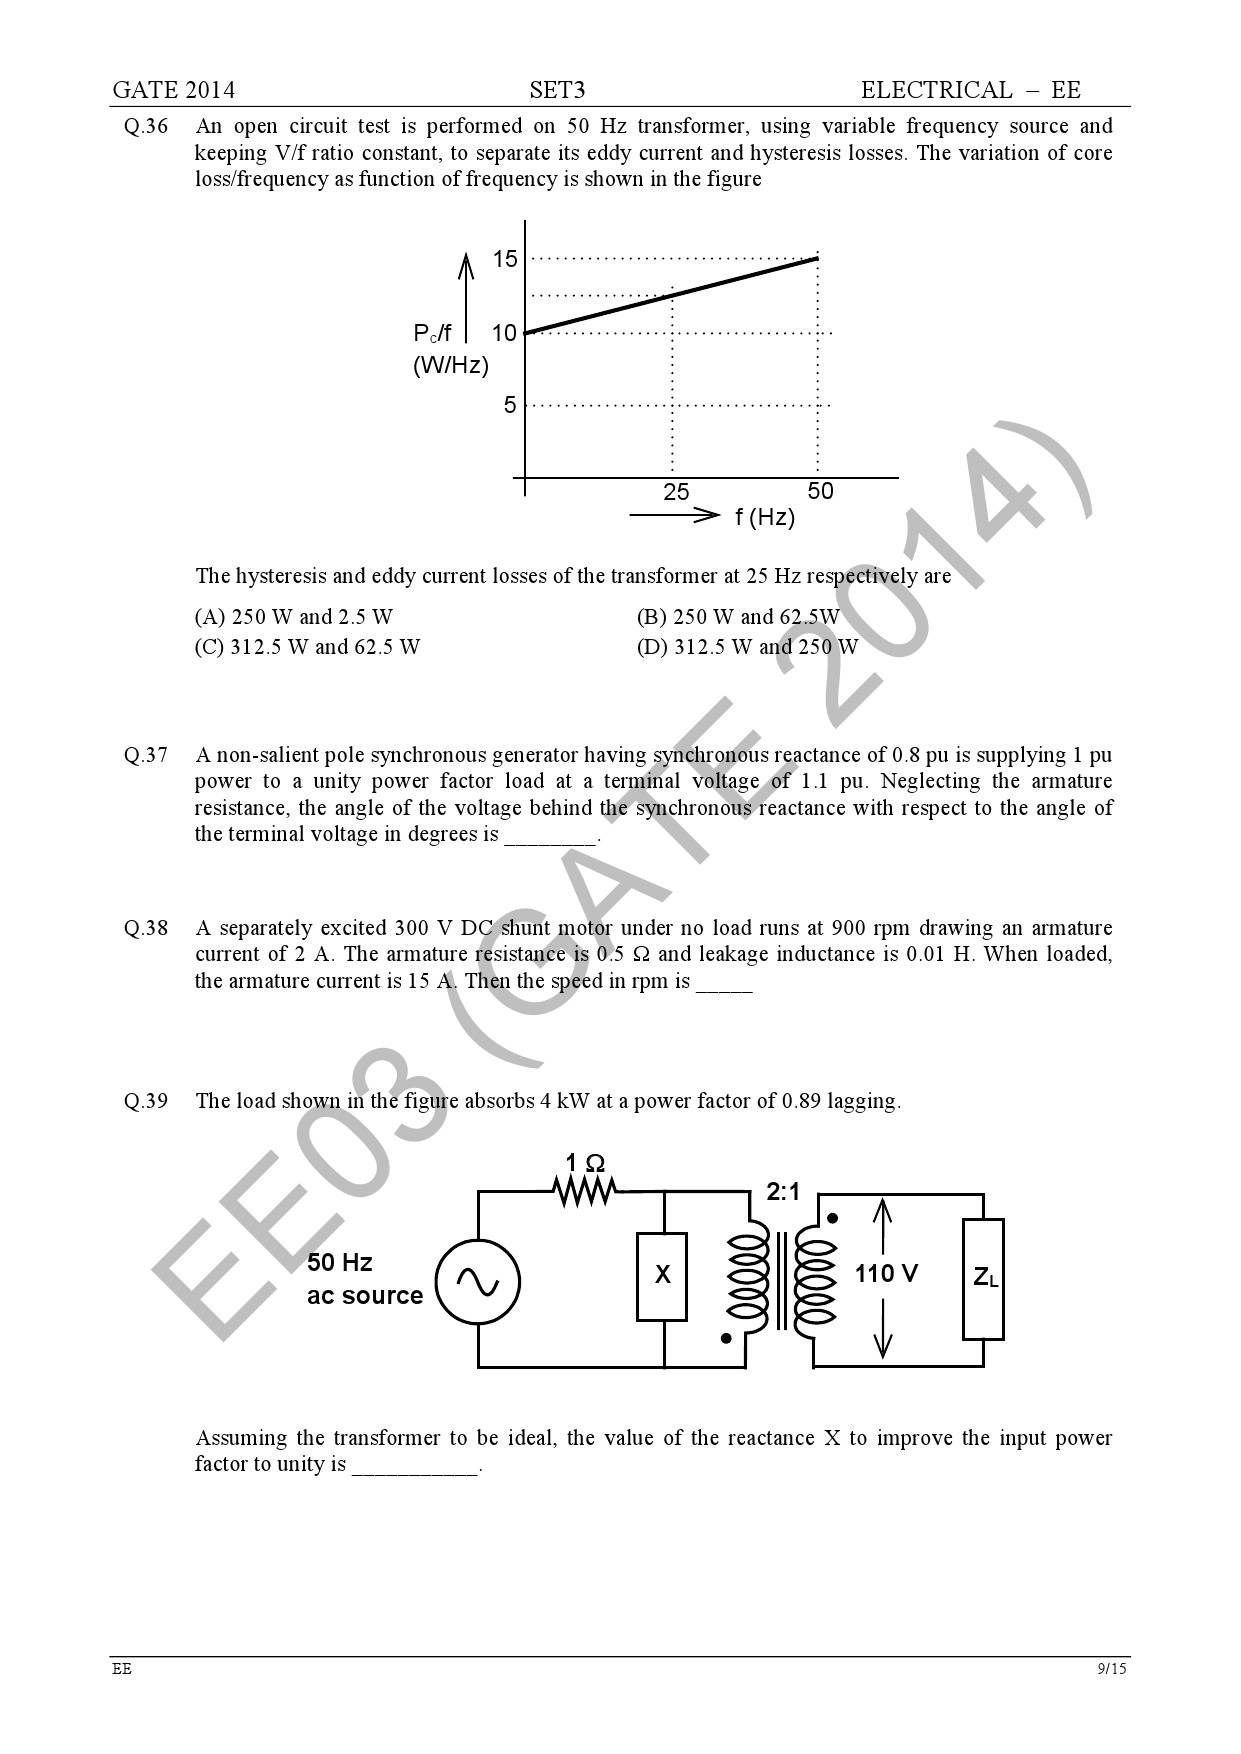 GATE Exam Question Paper 2014 Electrical Engineering Set 3 15